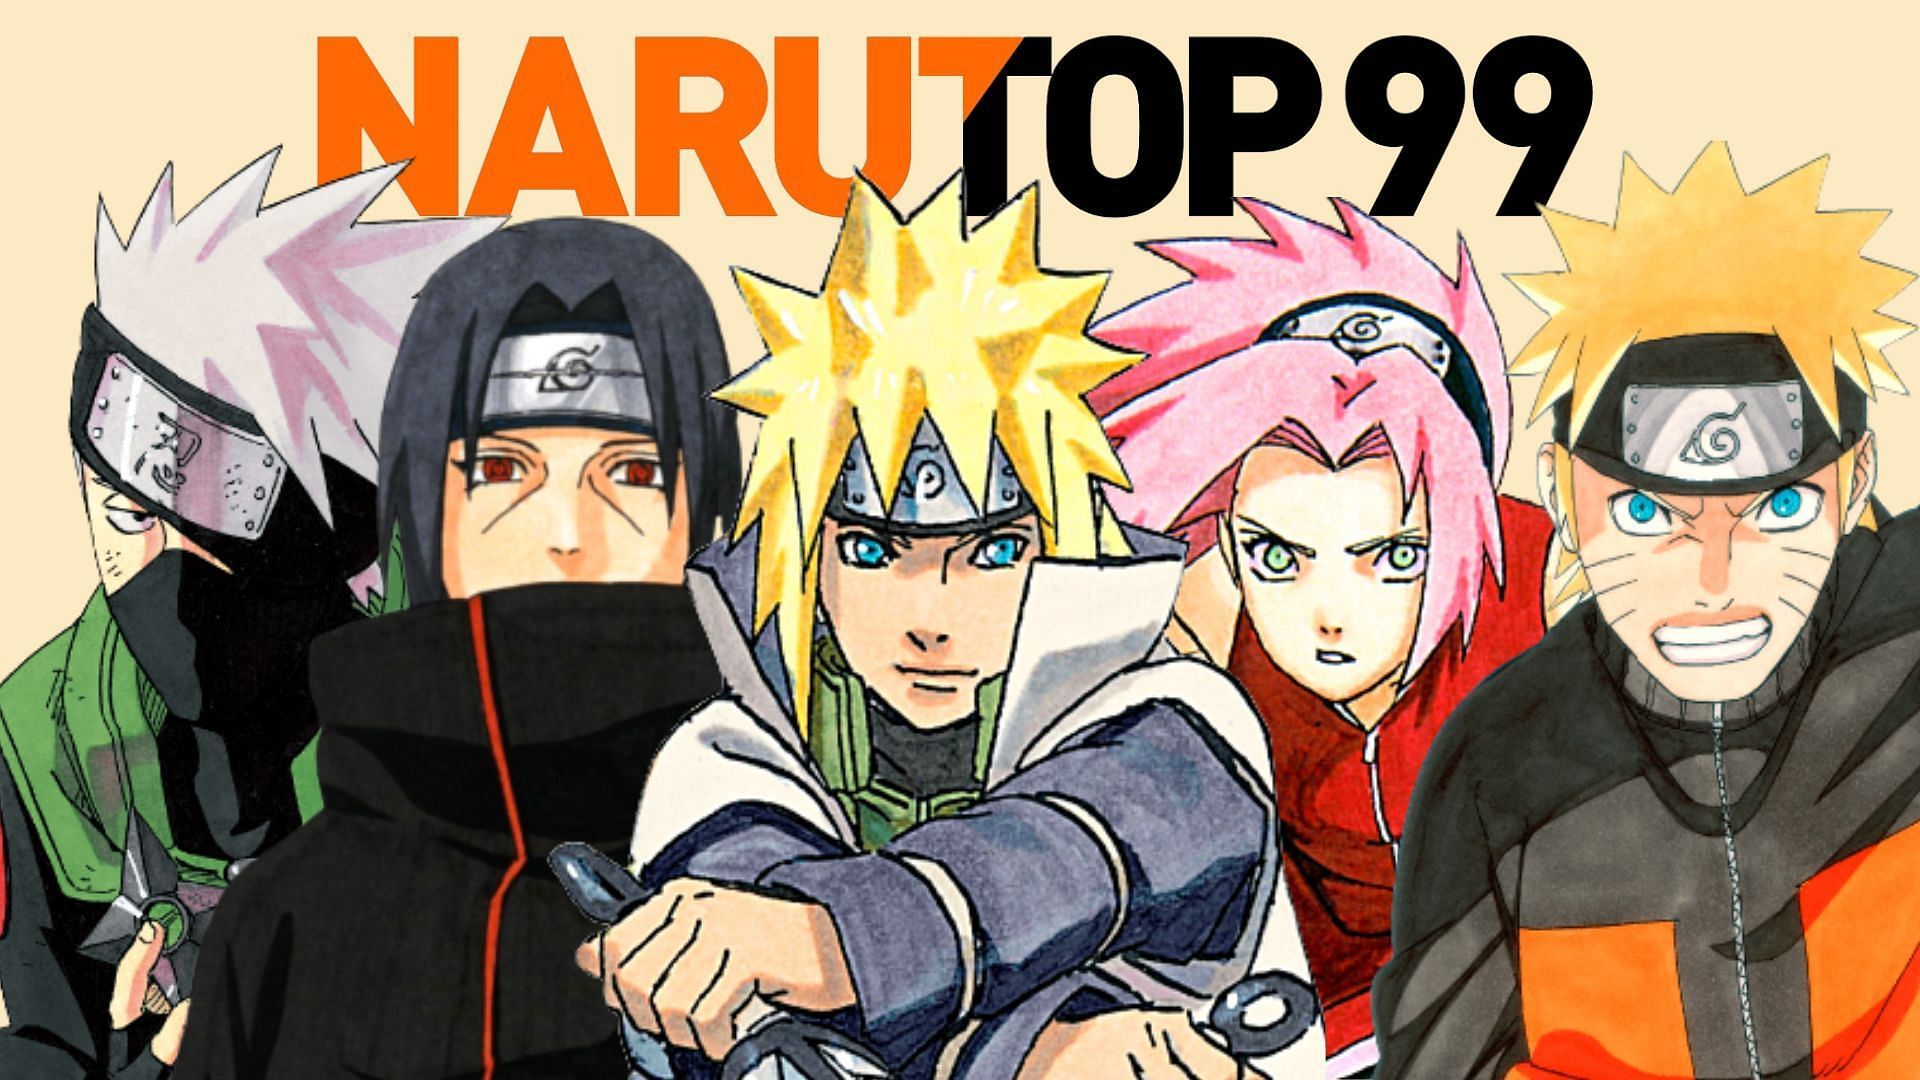 NARUTOP99 Results Announcement